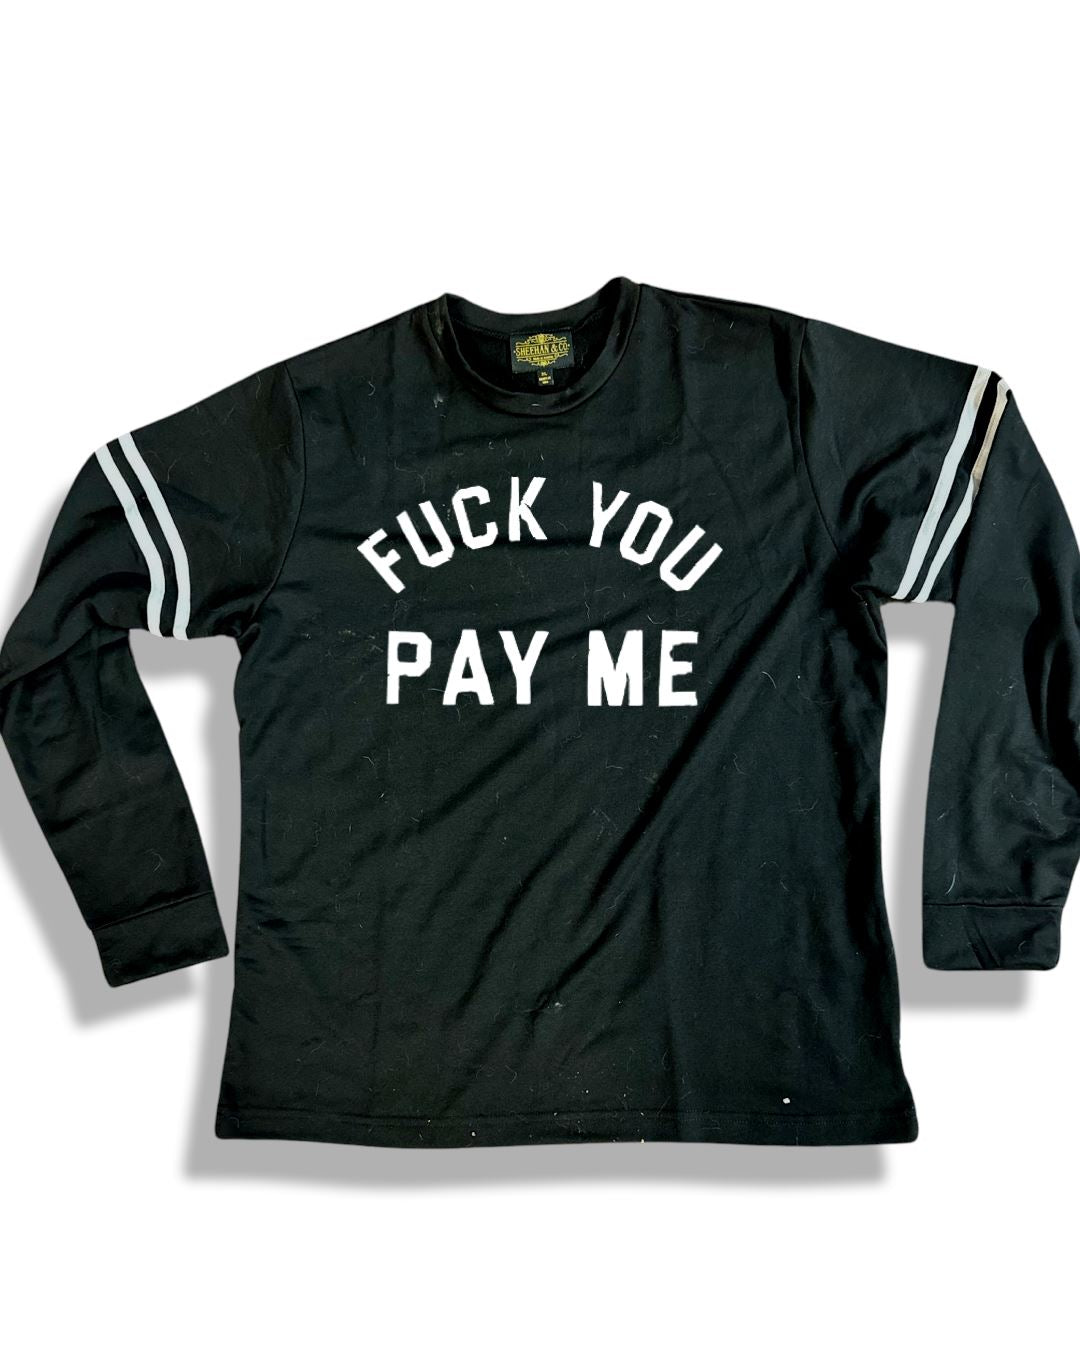 F*ck You Pay Me Statement on French Terry Strapped Sweatshirt - Sheehan and Co.